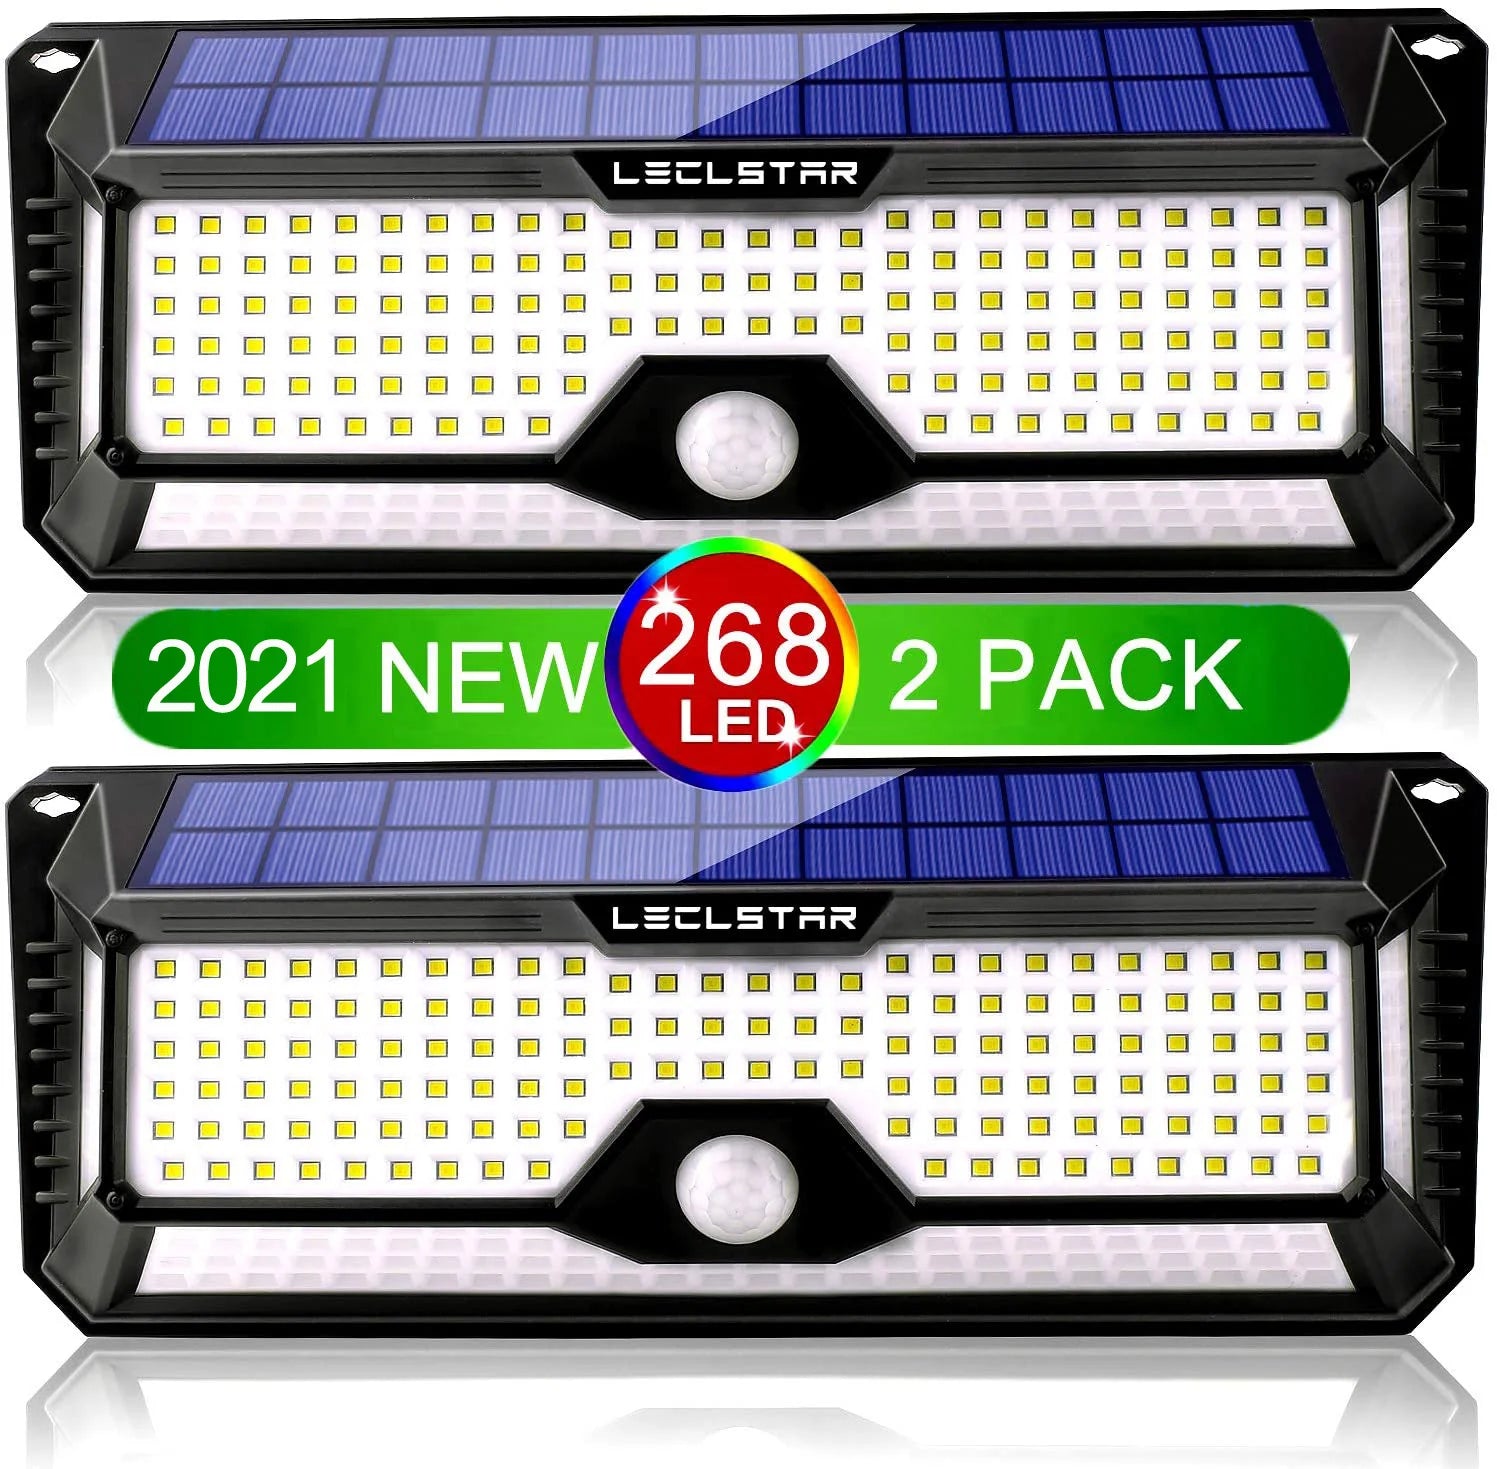 268 LED Reflector Solar Power Patio Light, 268 LED Reflector Lights, a new arrival by Lezlstar, perfect for outdoor decoration.